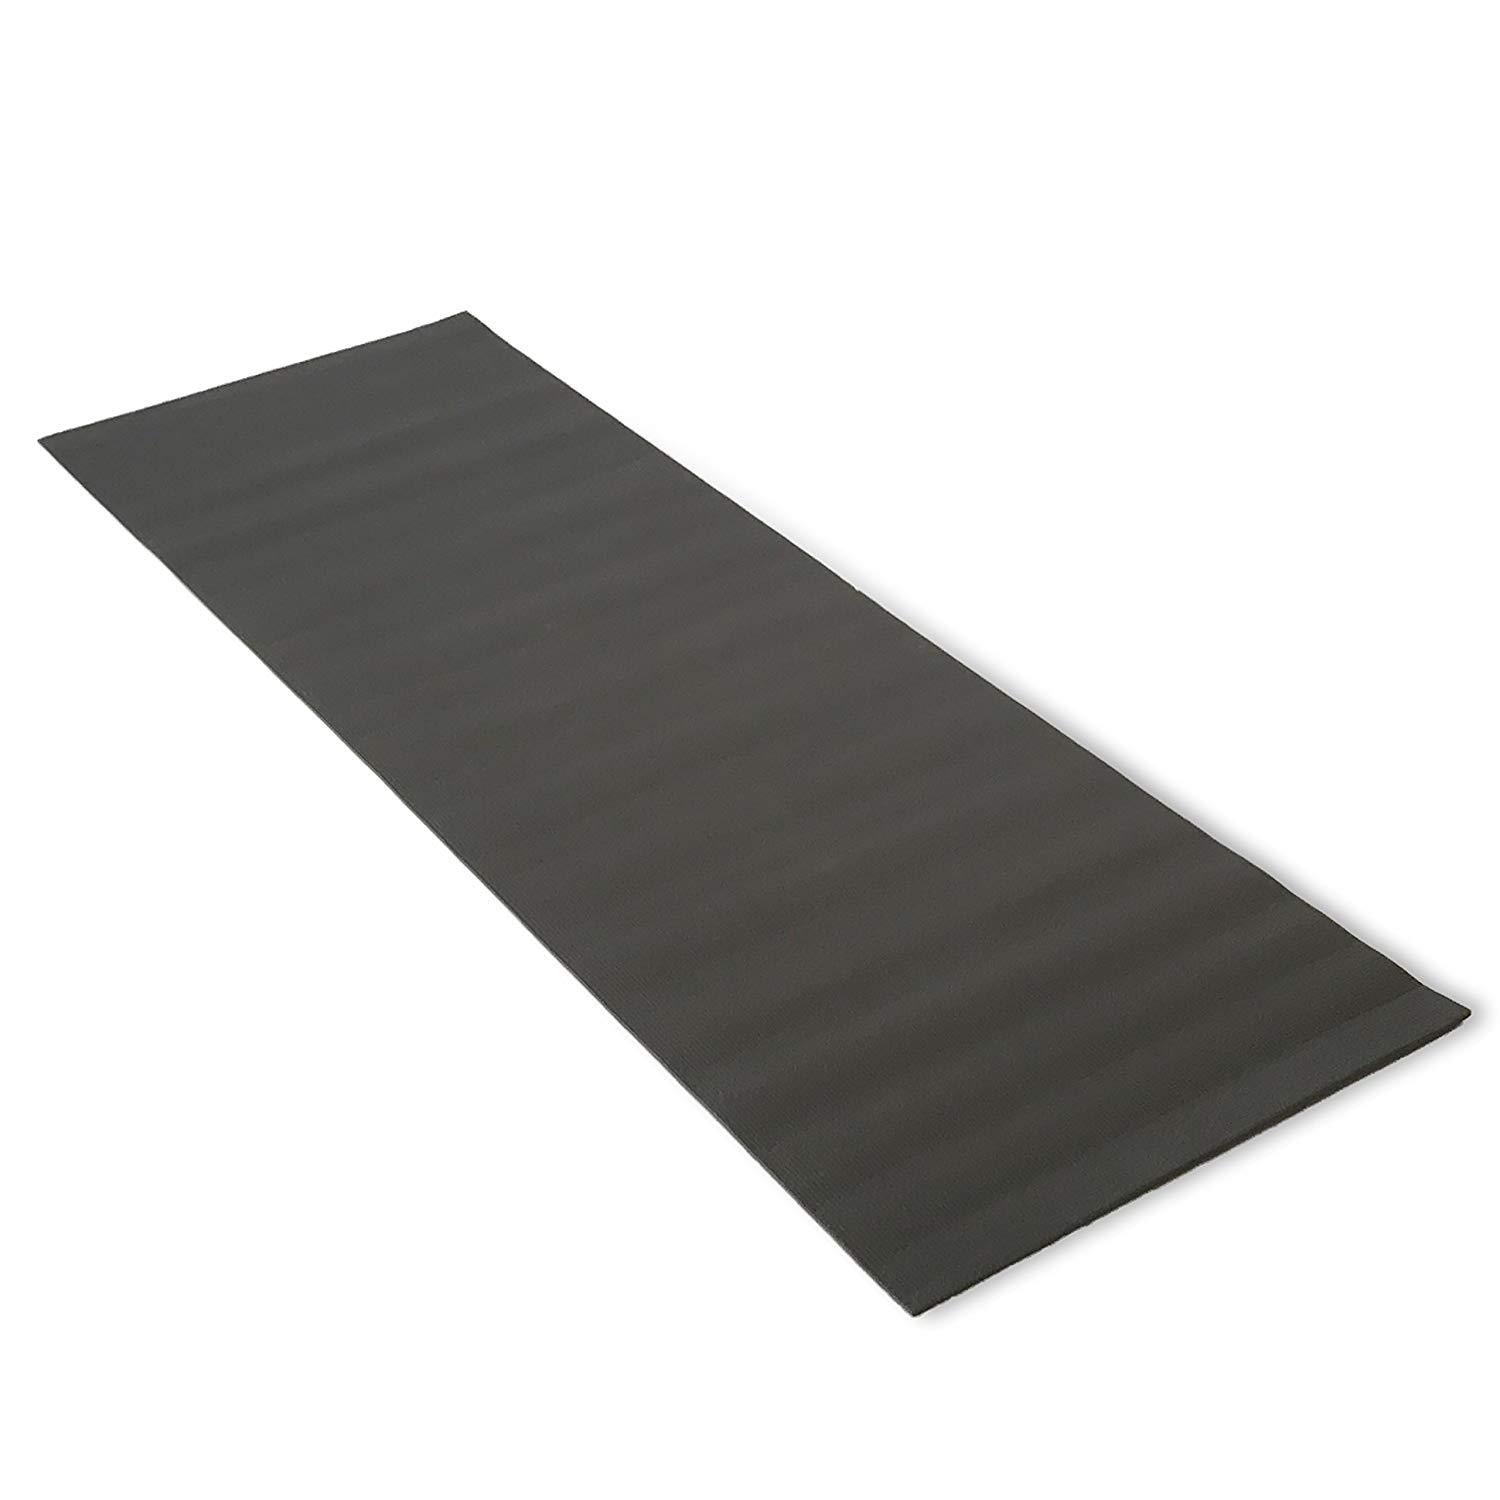 Yoga Mat - Eco-Friendly & Toxin Free - 72 x 26 inches